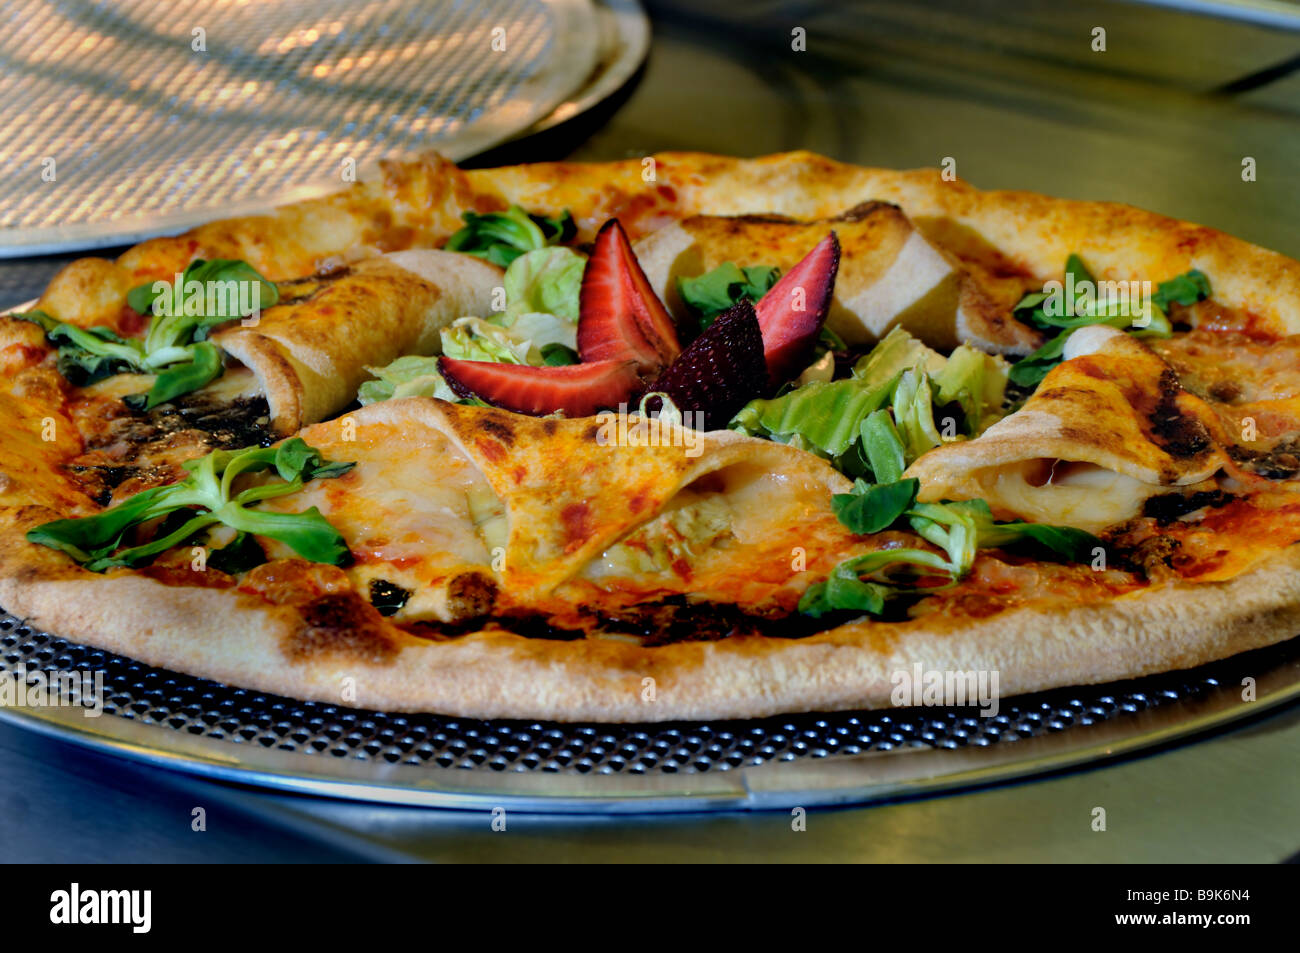 Food on a Plate"l Food Trade Show Italian Pizza with Fruit and Vegetables  at "Moretti Forni" Company Pizzeria France, table Stock Photo - Alamy